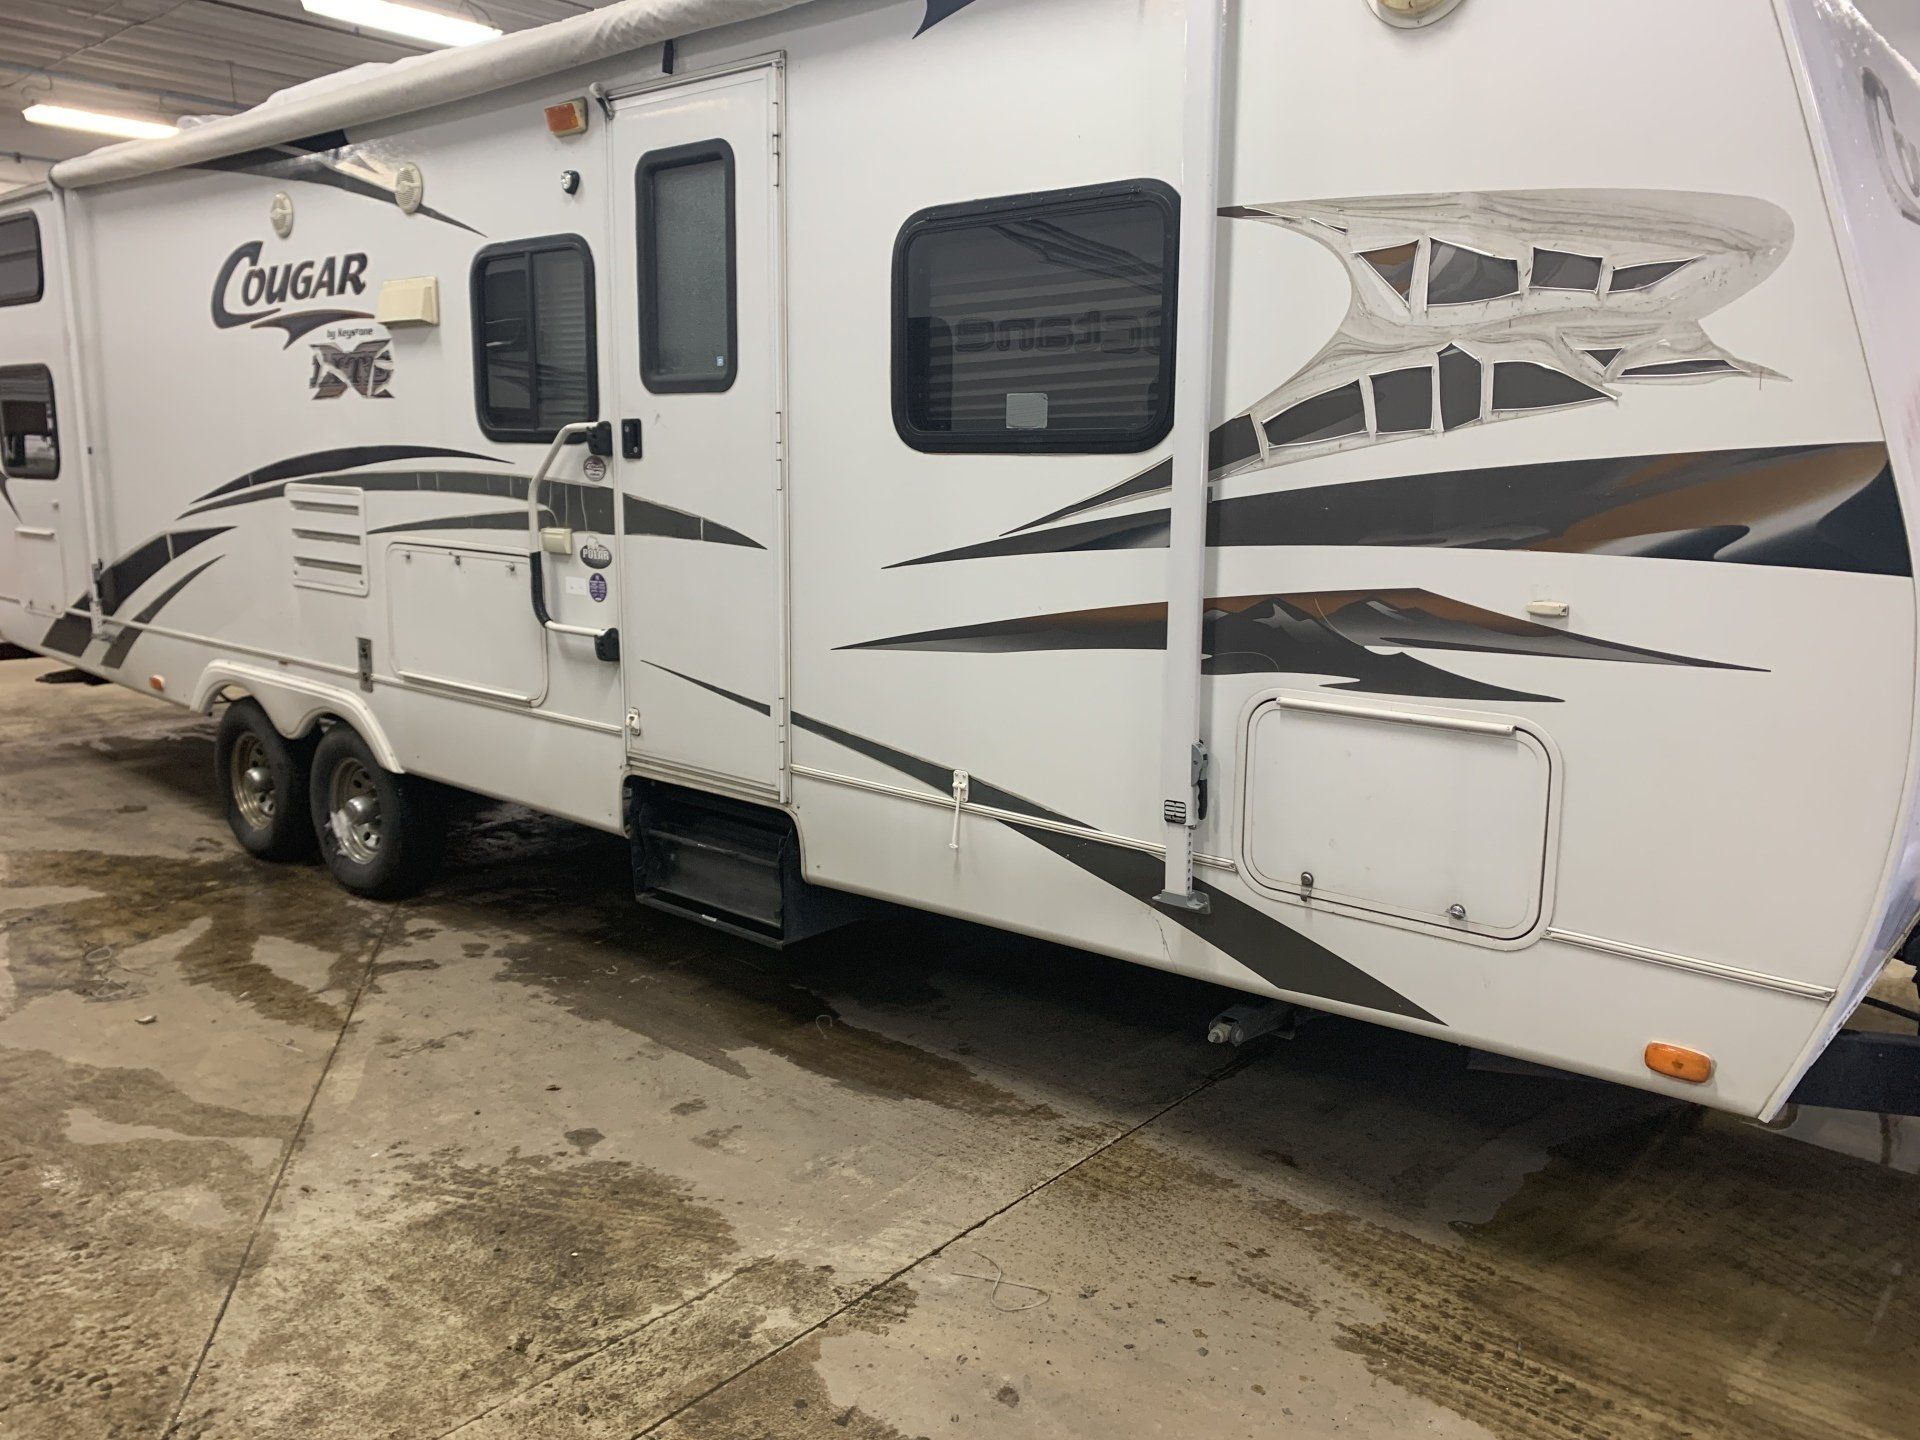 2020 - Alberta's Worst RV Decal Contest - Grand Prize Winner - Before & After - Pic 16